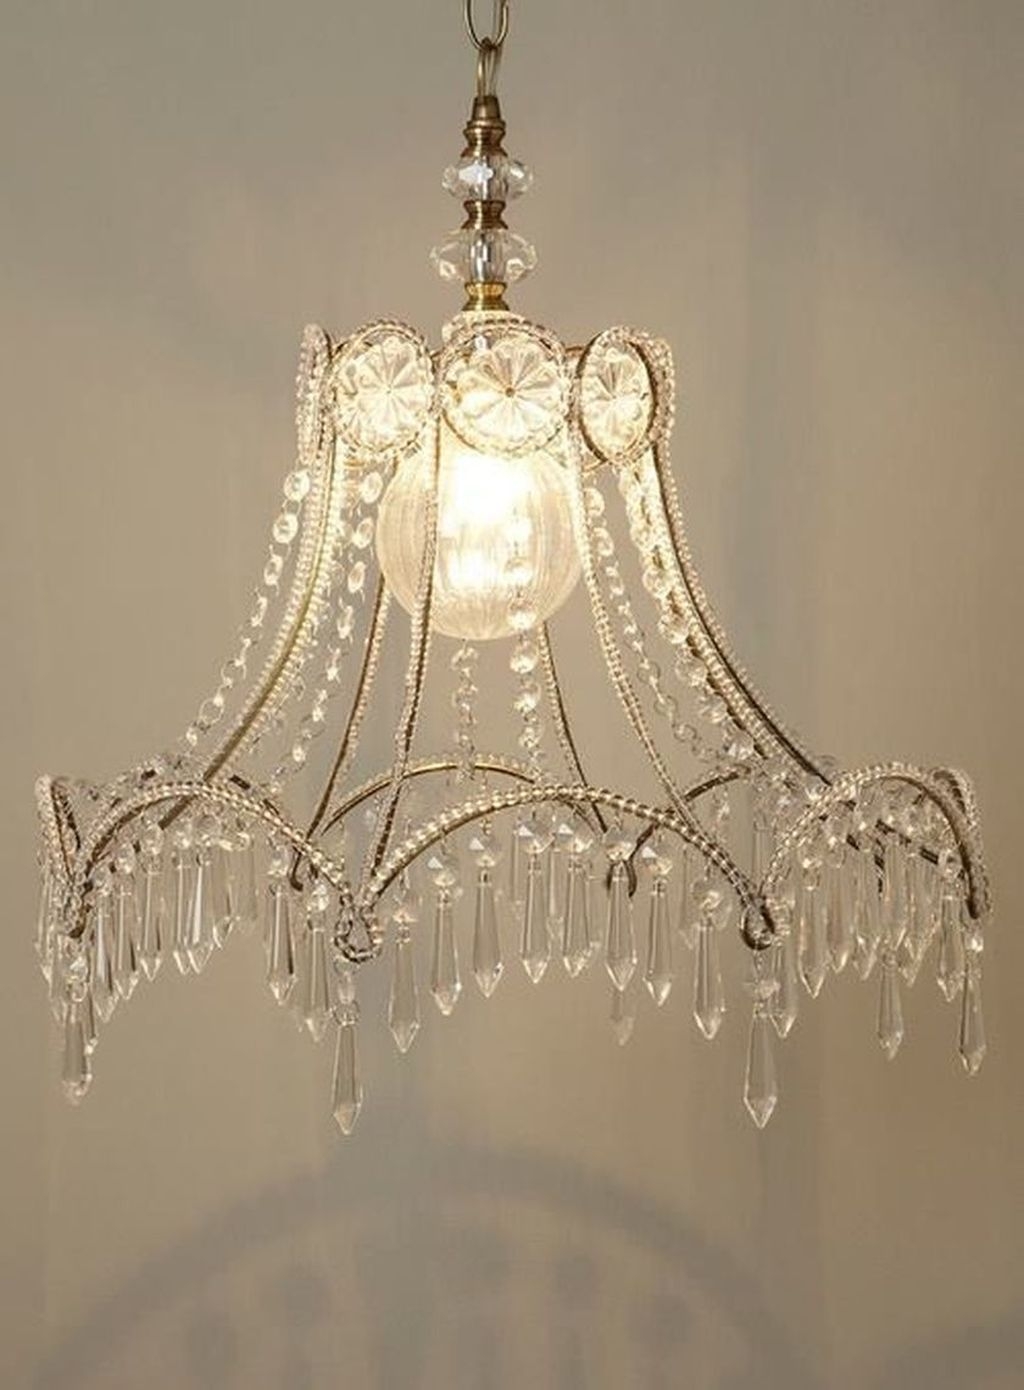 Beaded chandelier lamp shades 2